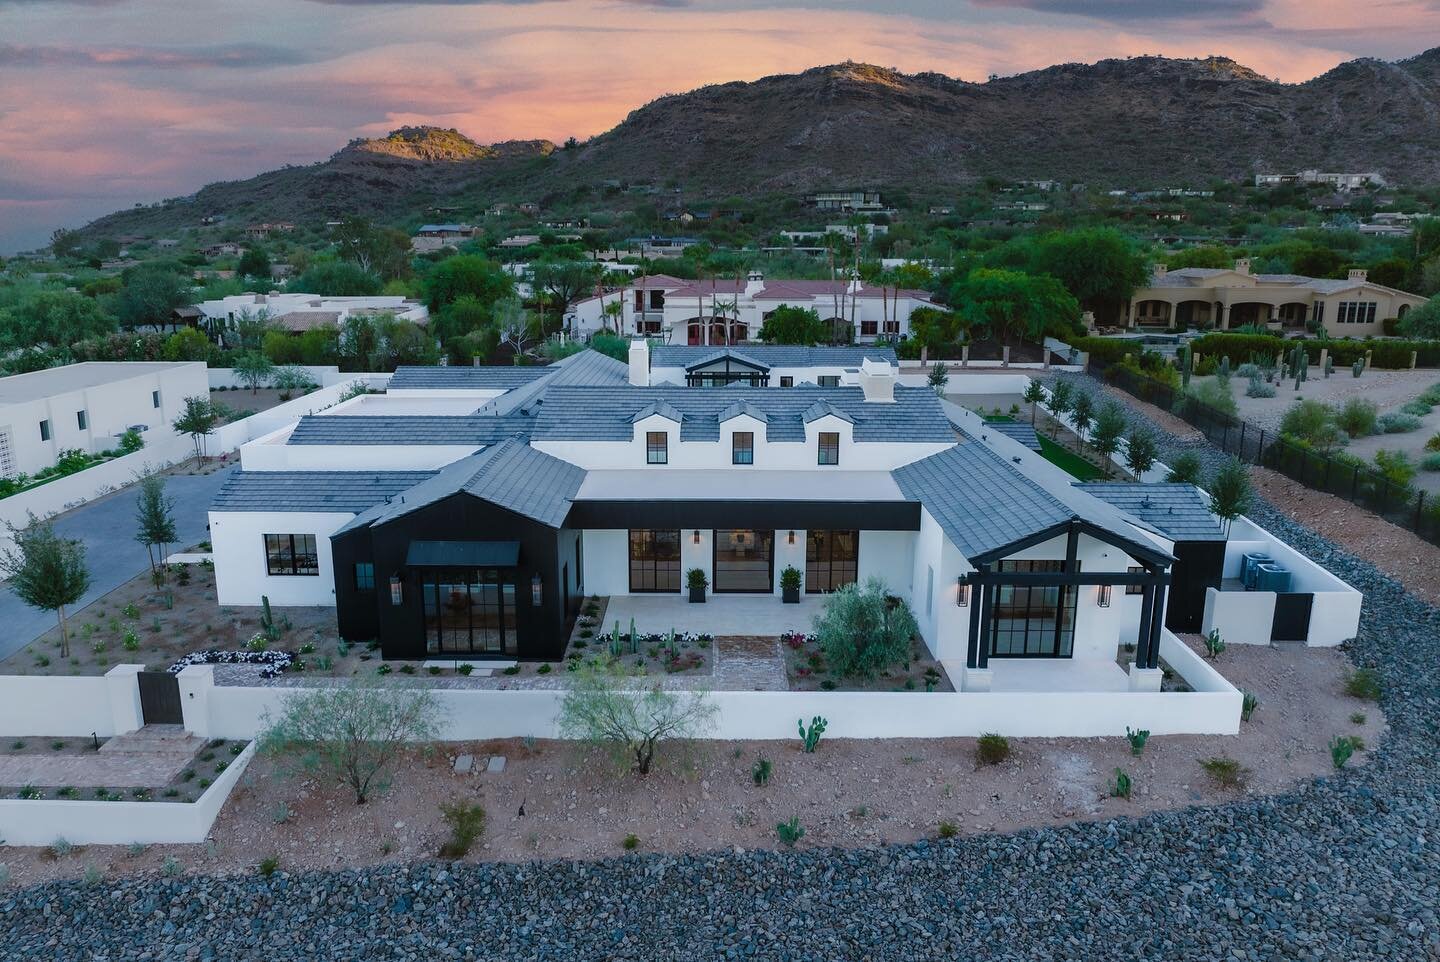 Welcome to Cholla Charm, a family sanctuary tucked on a quiet street in Mummy Mountain. It offers five bedrooms, 6.5 bathrooms, an office, a fully functional detached guest home, and 360&deg; views. We built this house to always make it feel like you